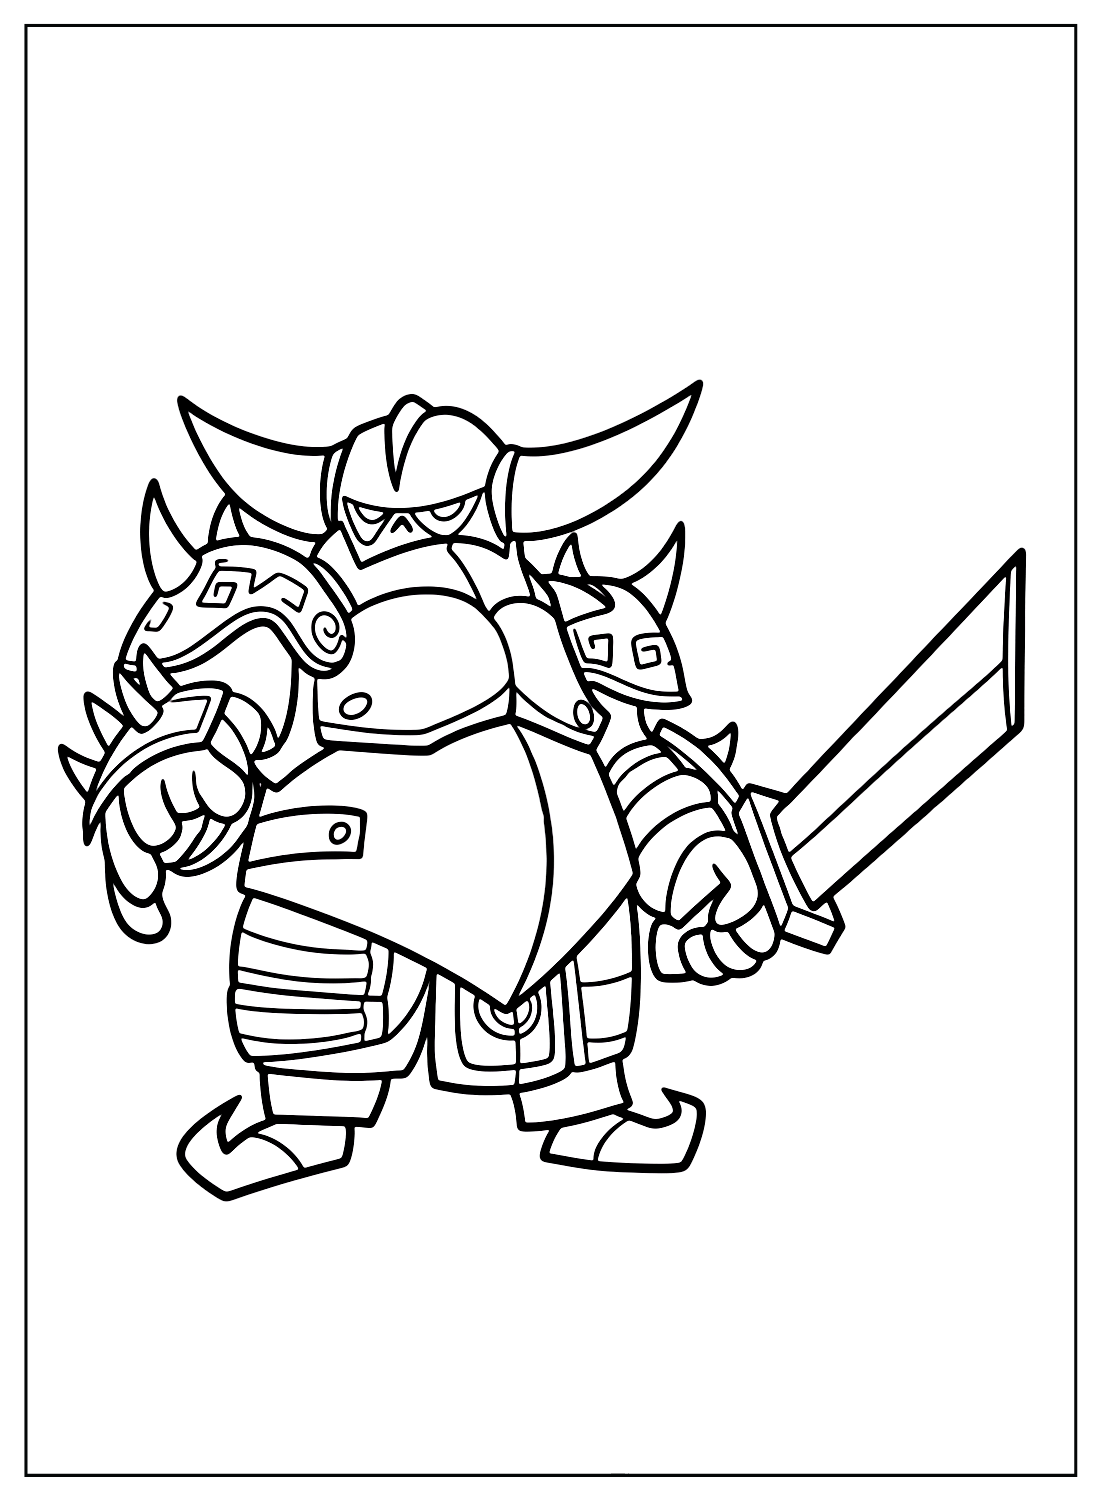 Clash of Clans Coloring Page To Print from Clash of Clans